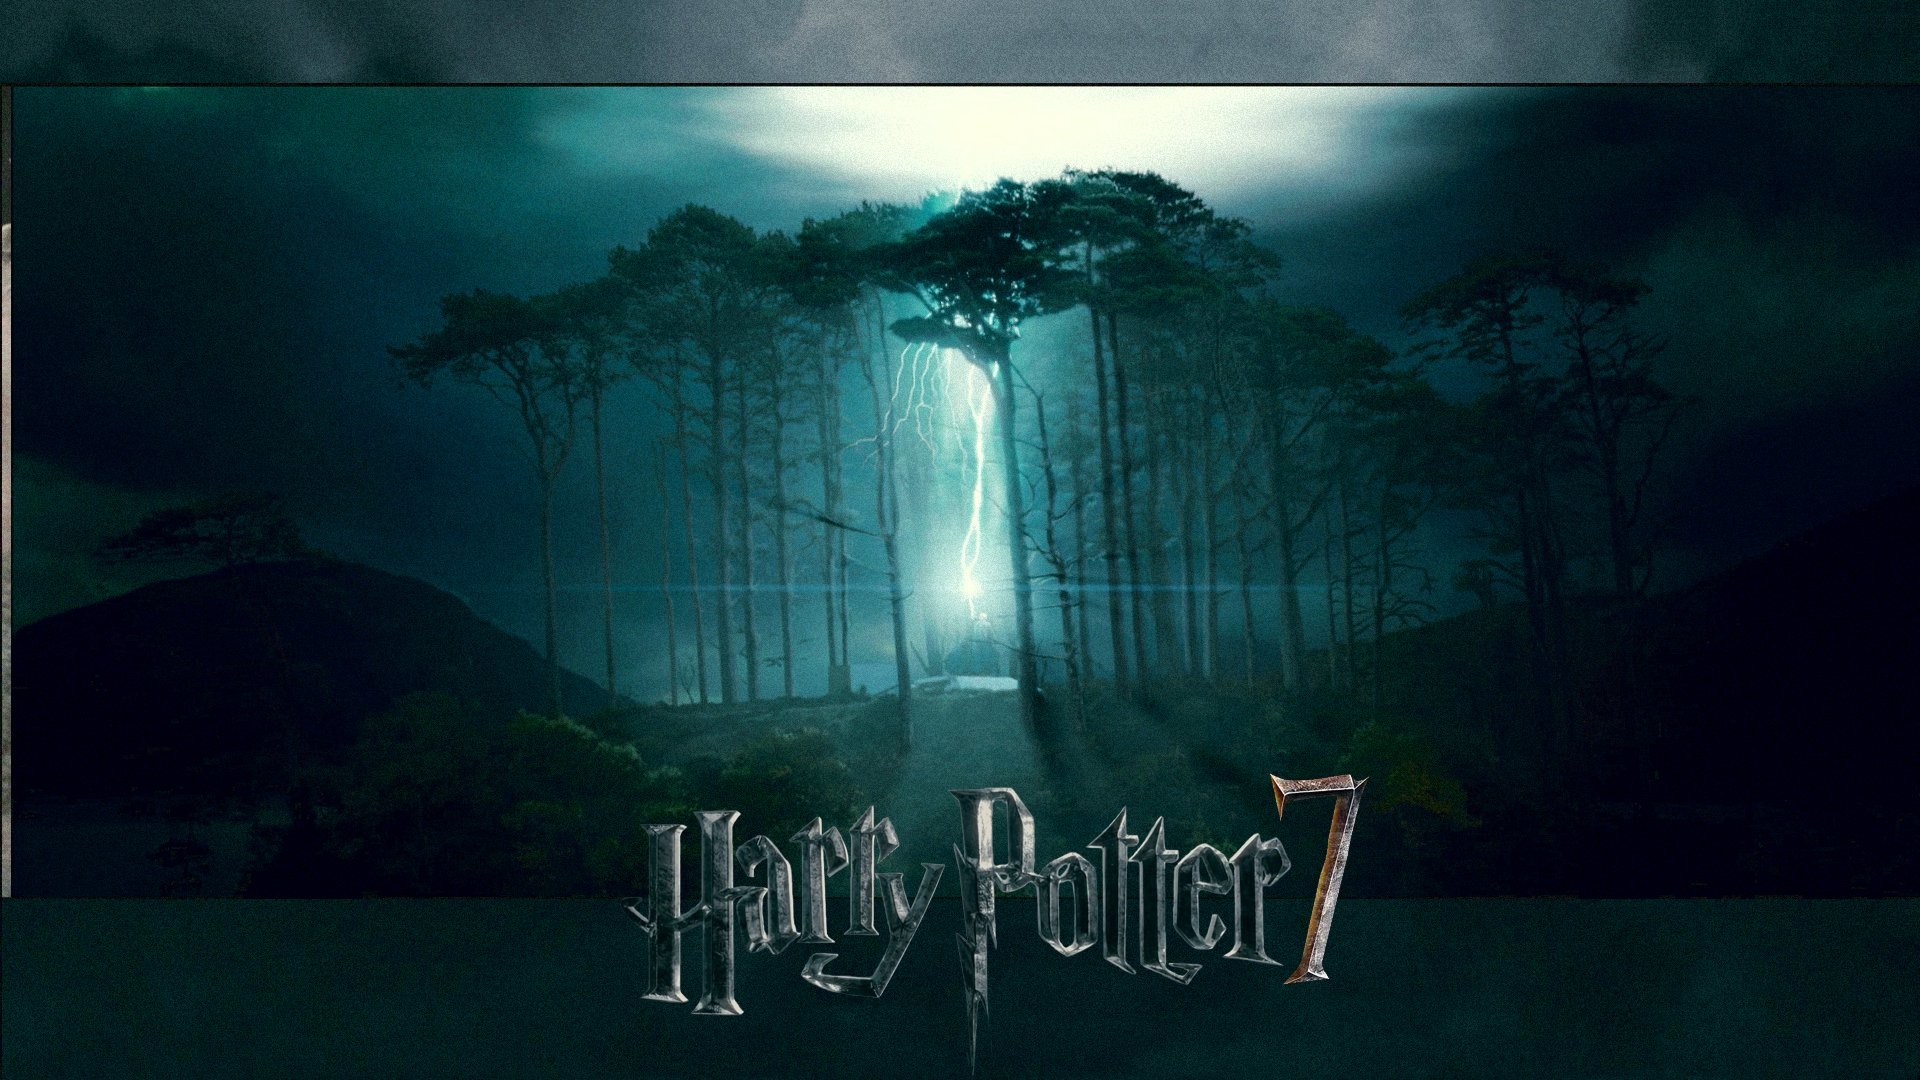 Harry Potter and the Deathly Hallows wallpaper Movie wallpapers 500500 Deathly Hallows Wallpapers